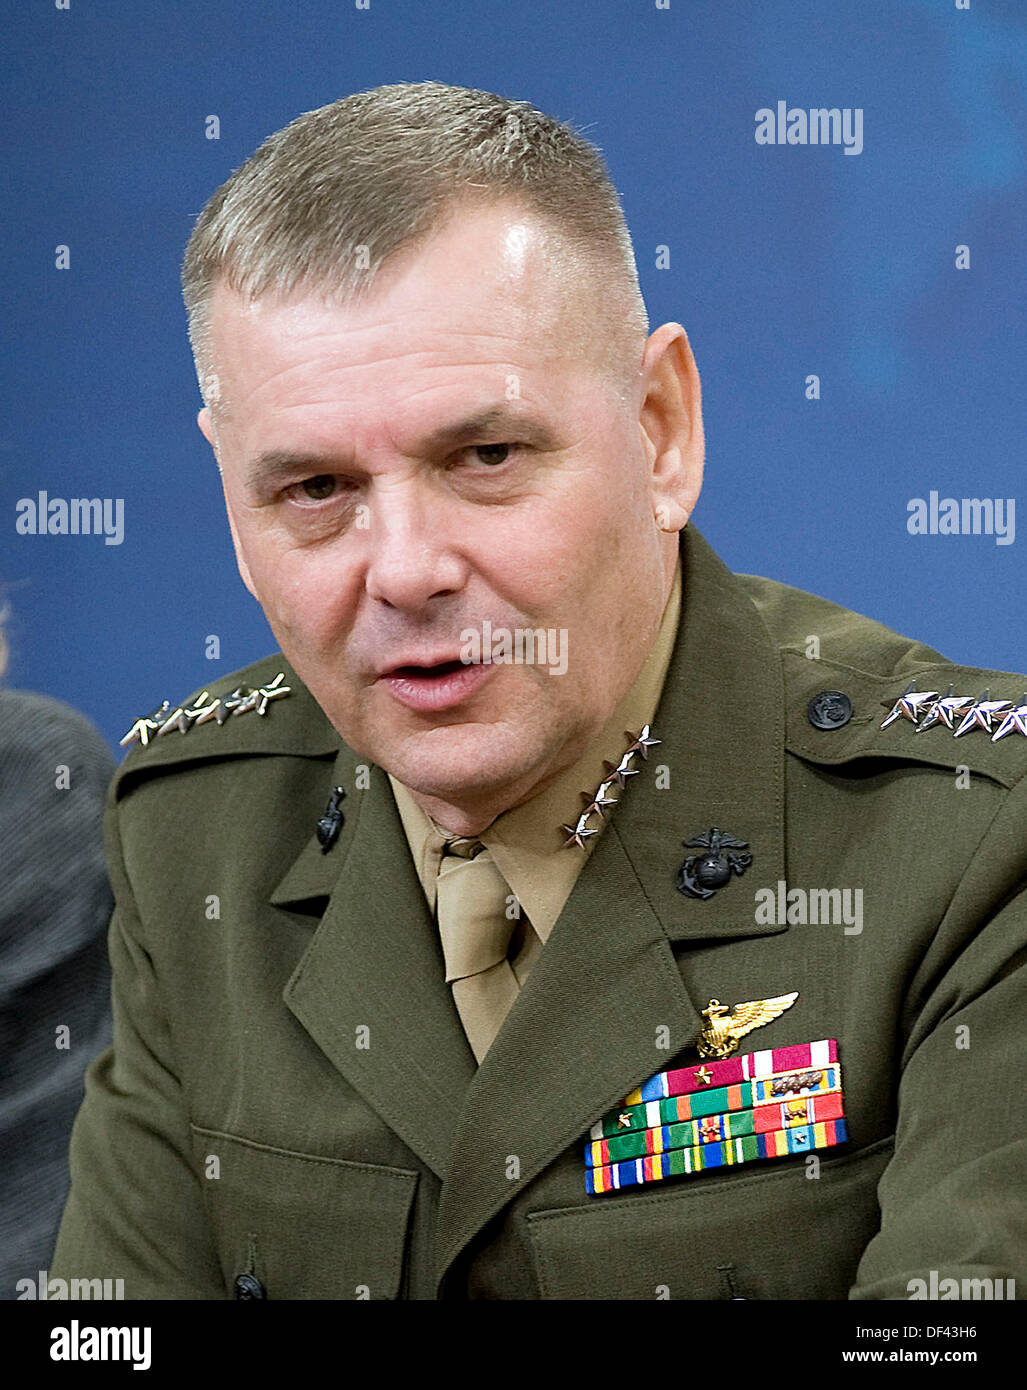 United States Marine General James E. Cartwright, Jr., Vice Chairman of the